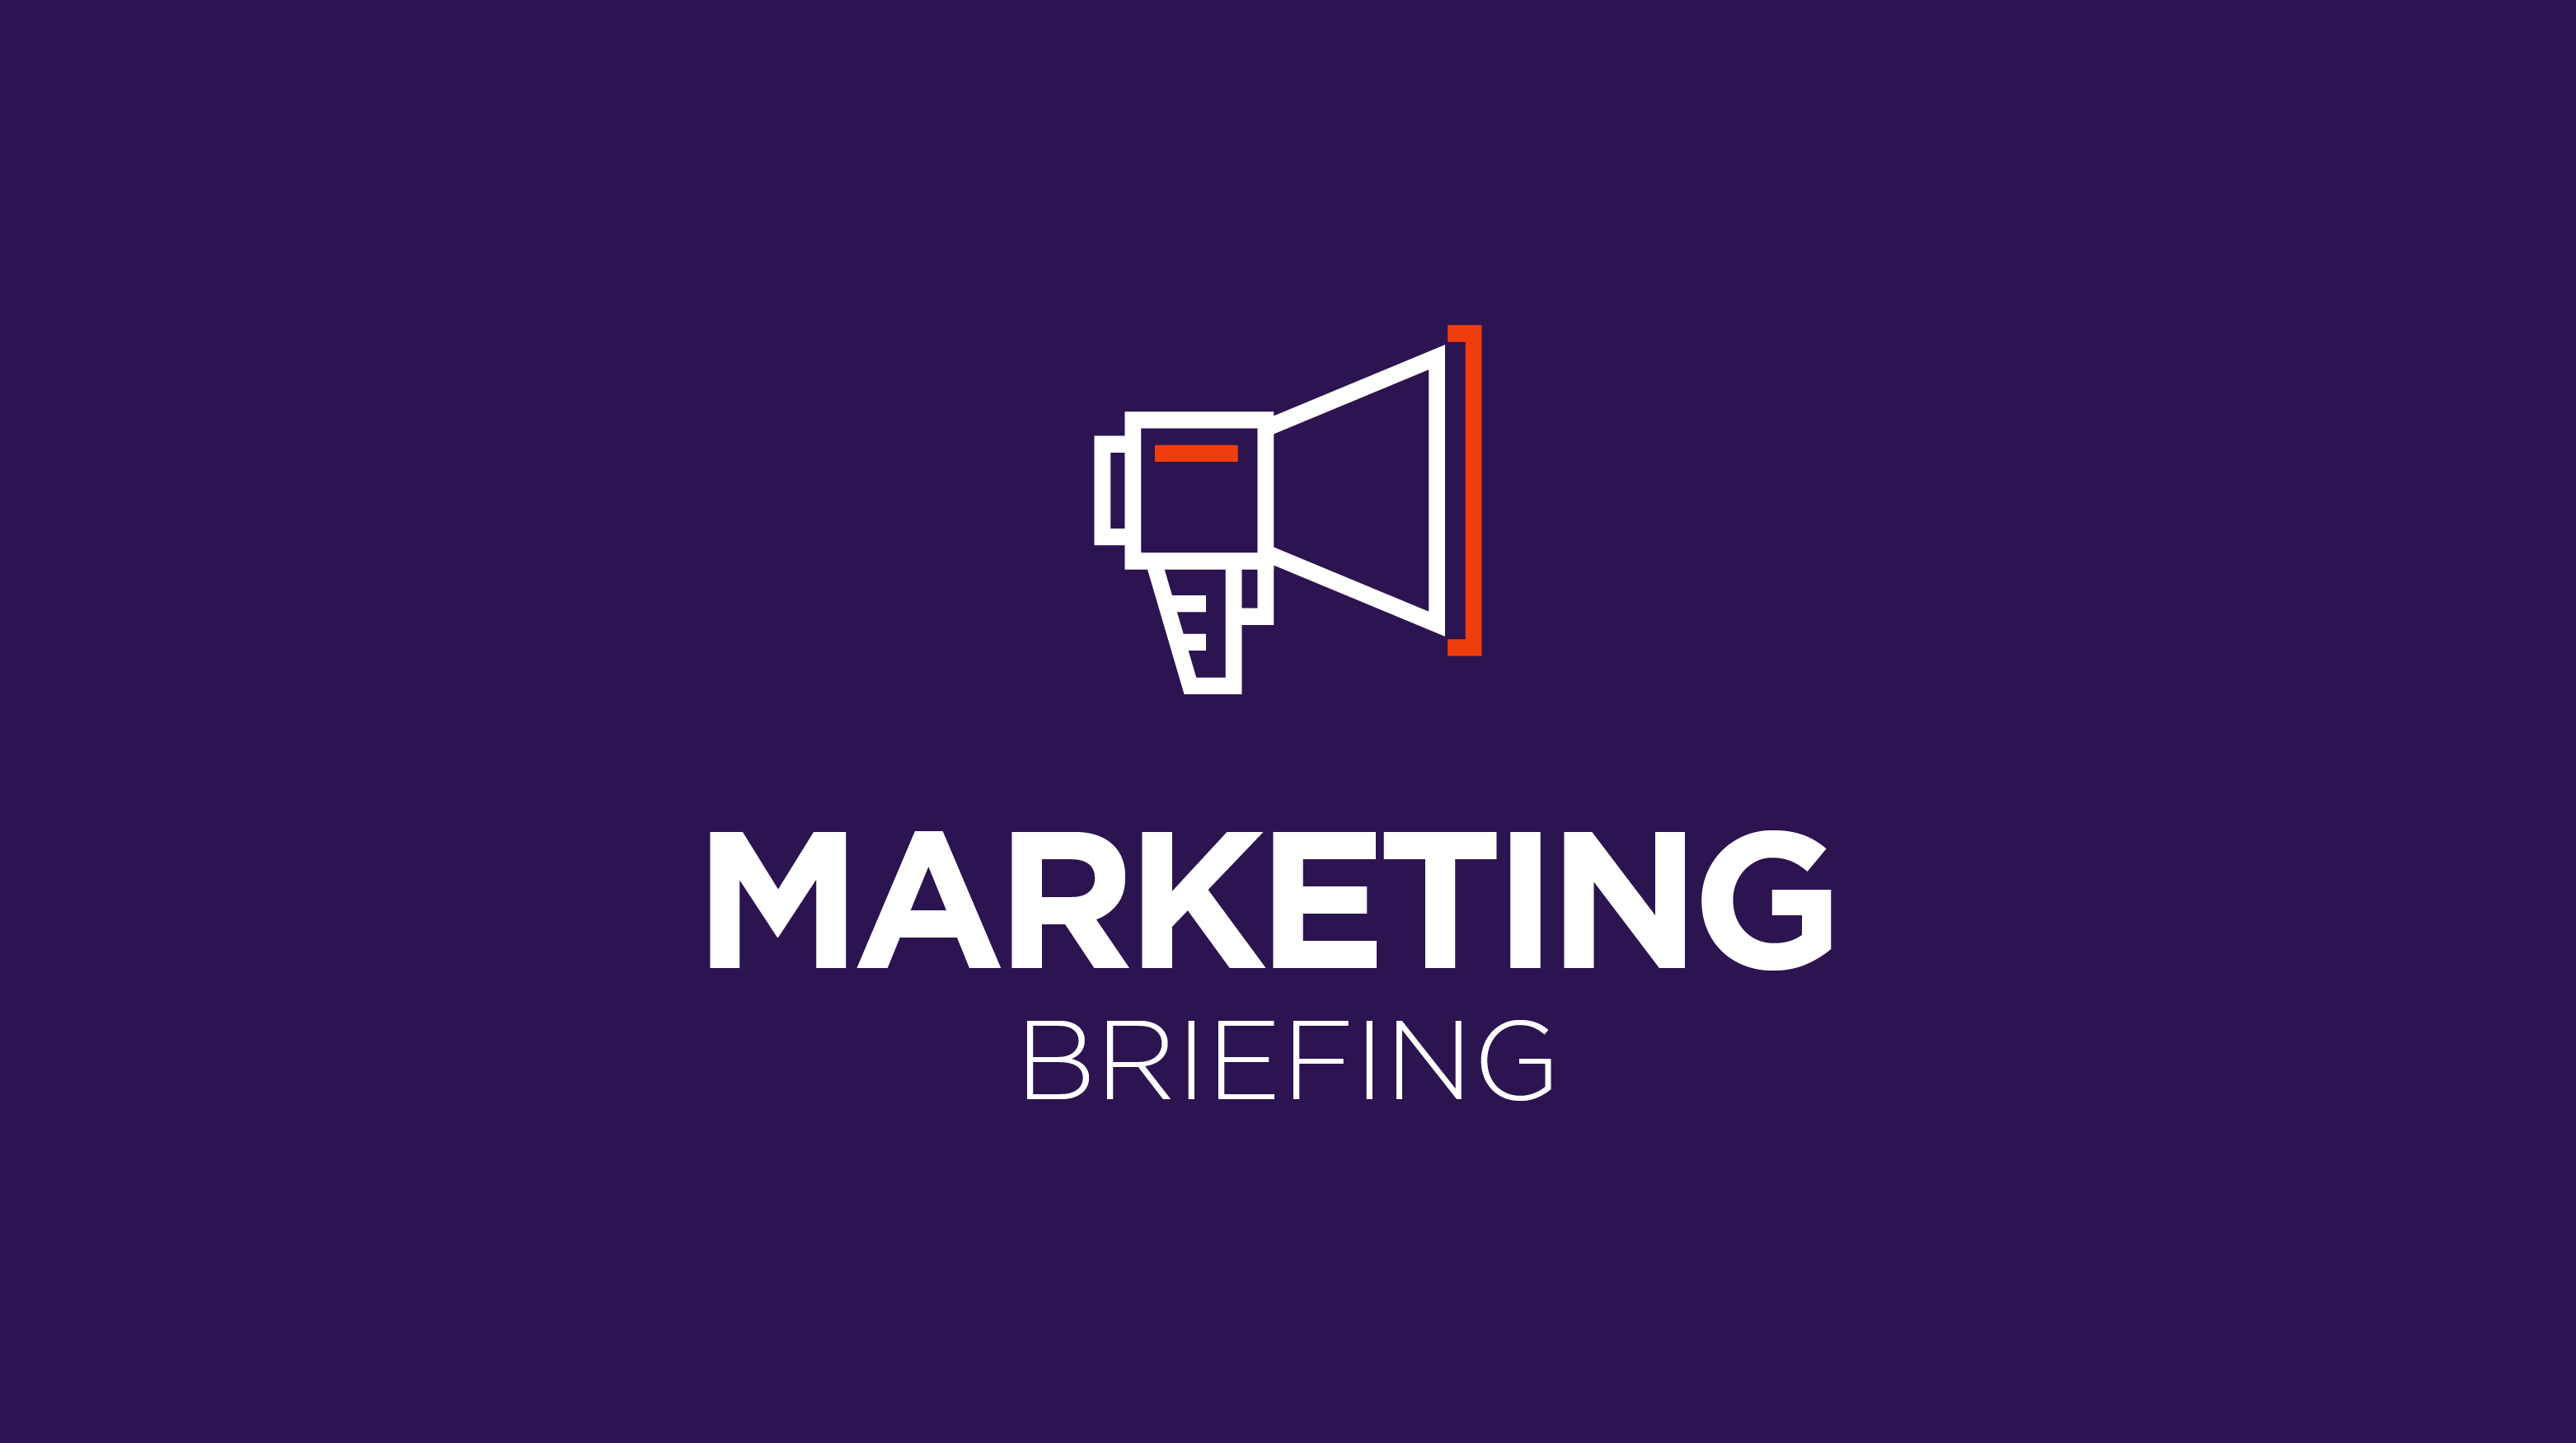 Marketing Briefing: Deloitte’s recent insights for bank marketers